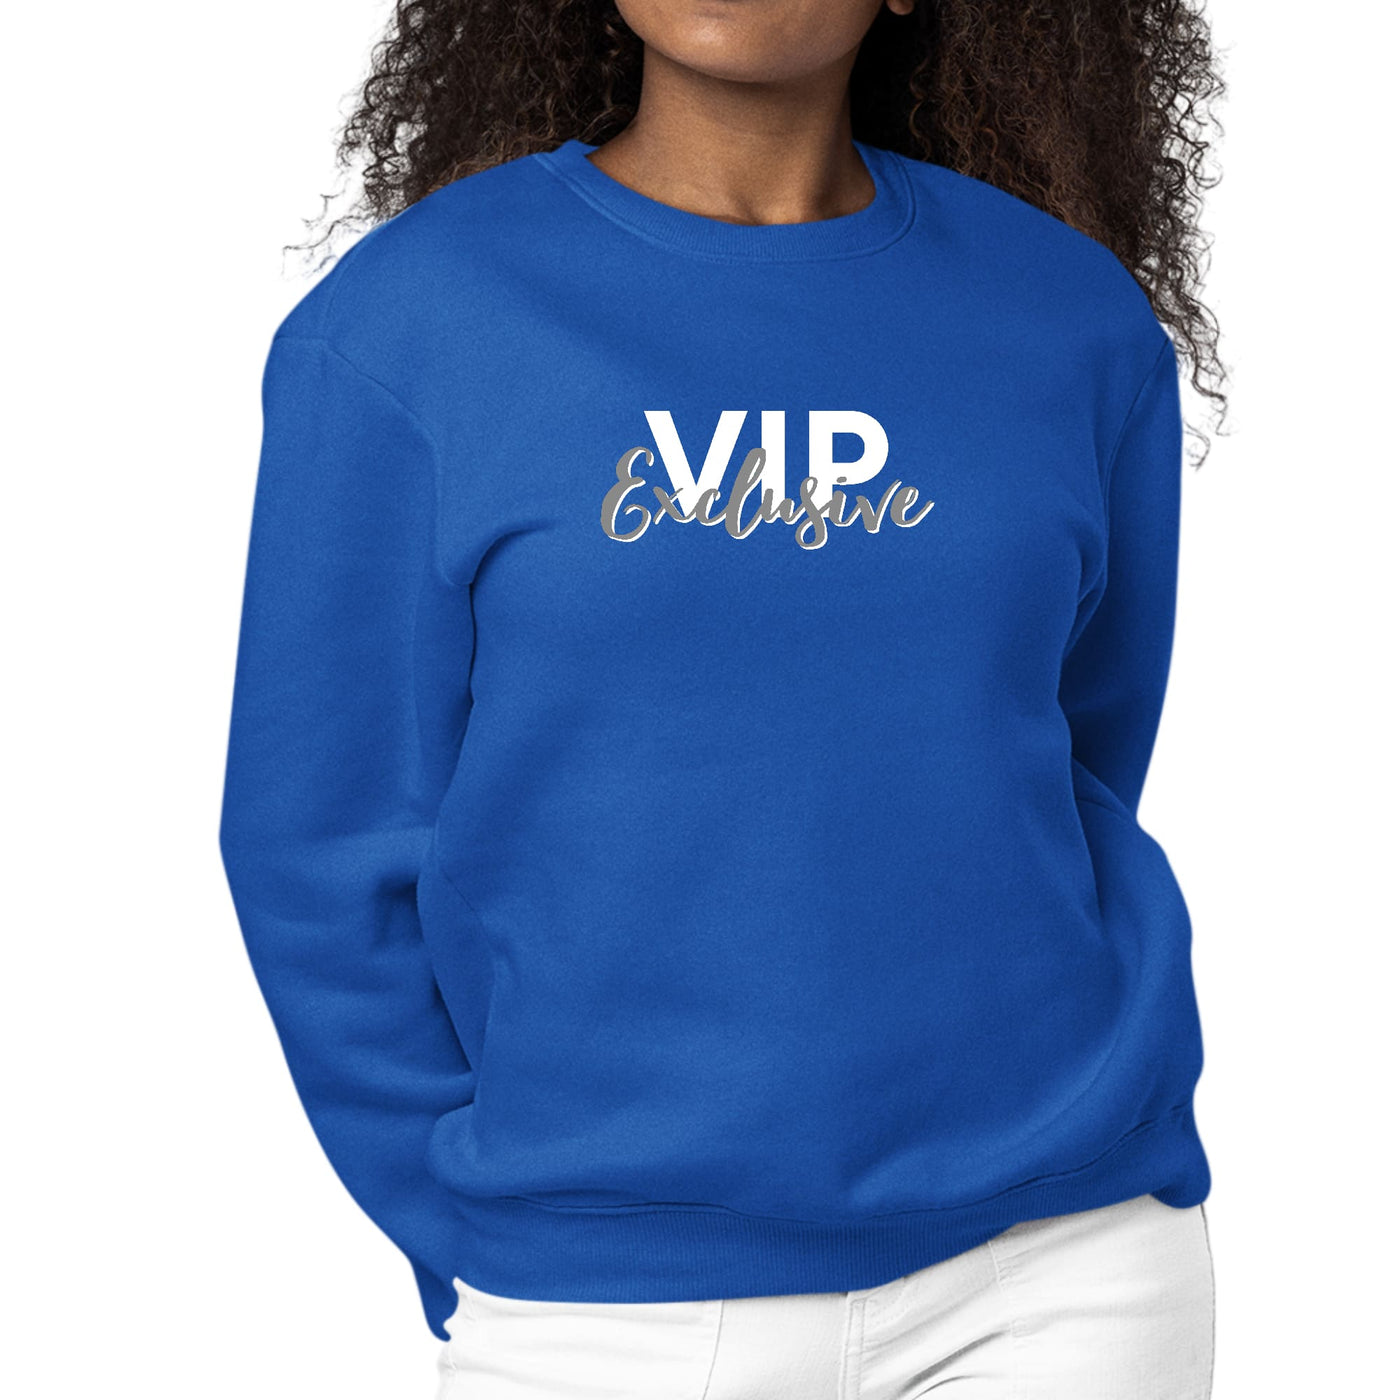 Womens Graphic Sweatshirt Vip Exclusive Grey And White - Affirmation - Womens